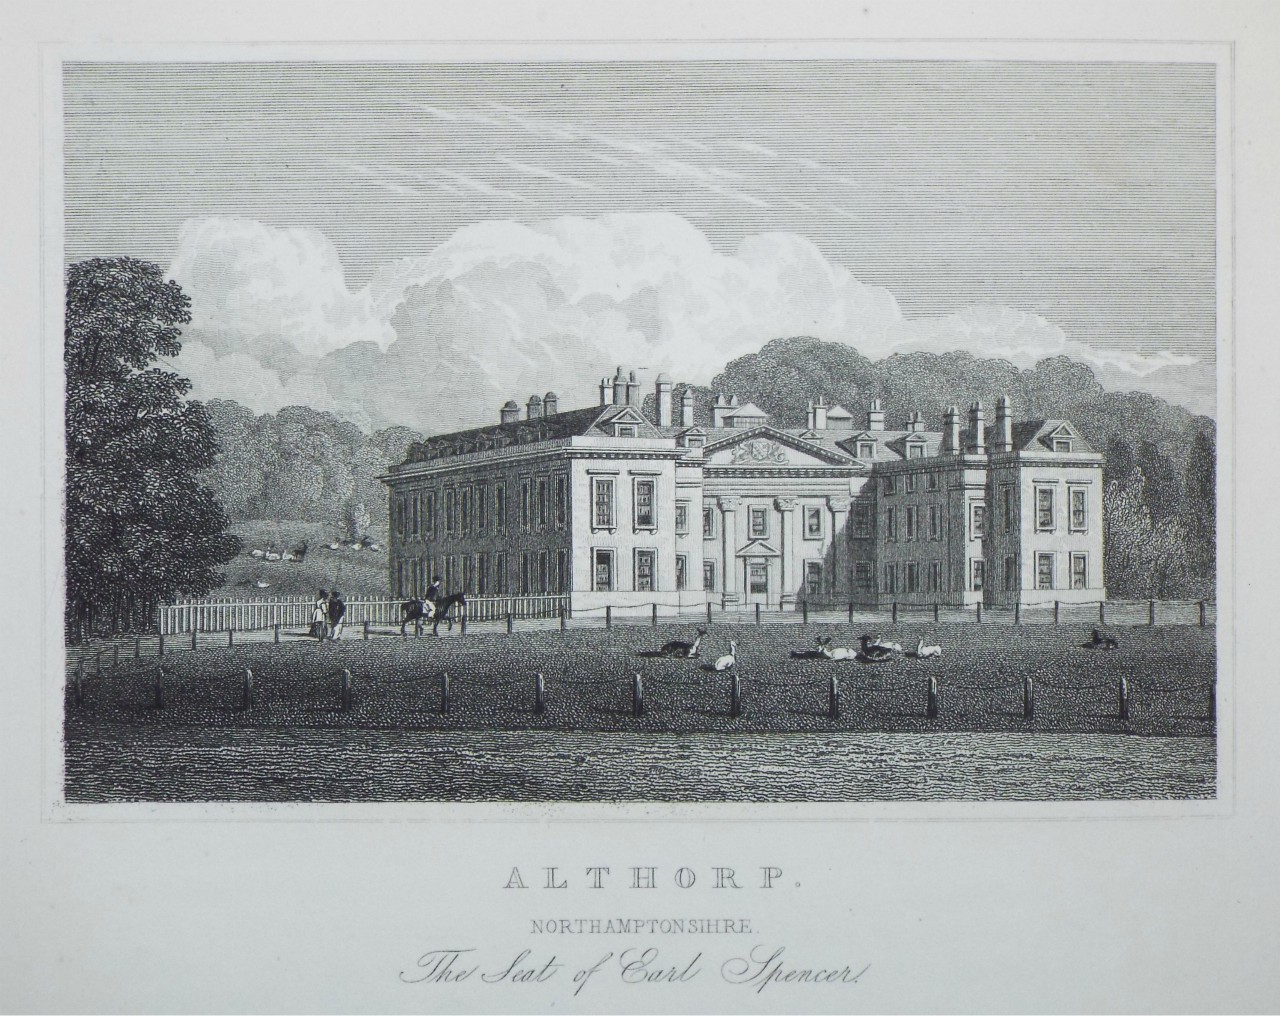 Print - Althorp, Northamptonshire. The Seat of Earl Spencer.  - Radclyffe